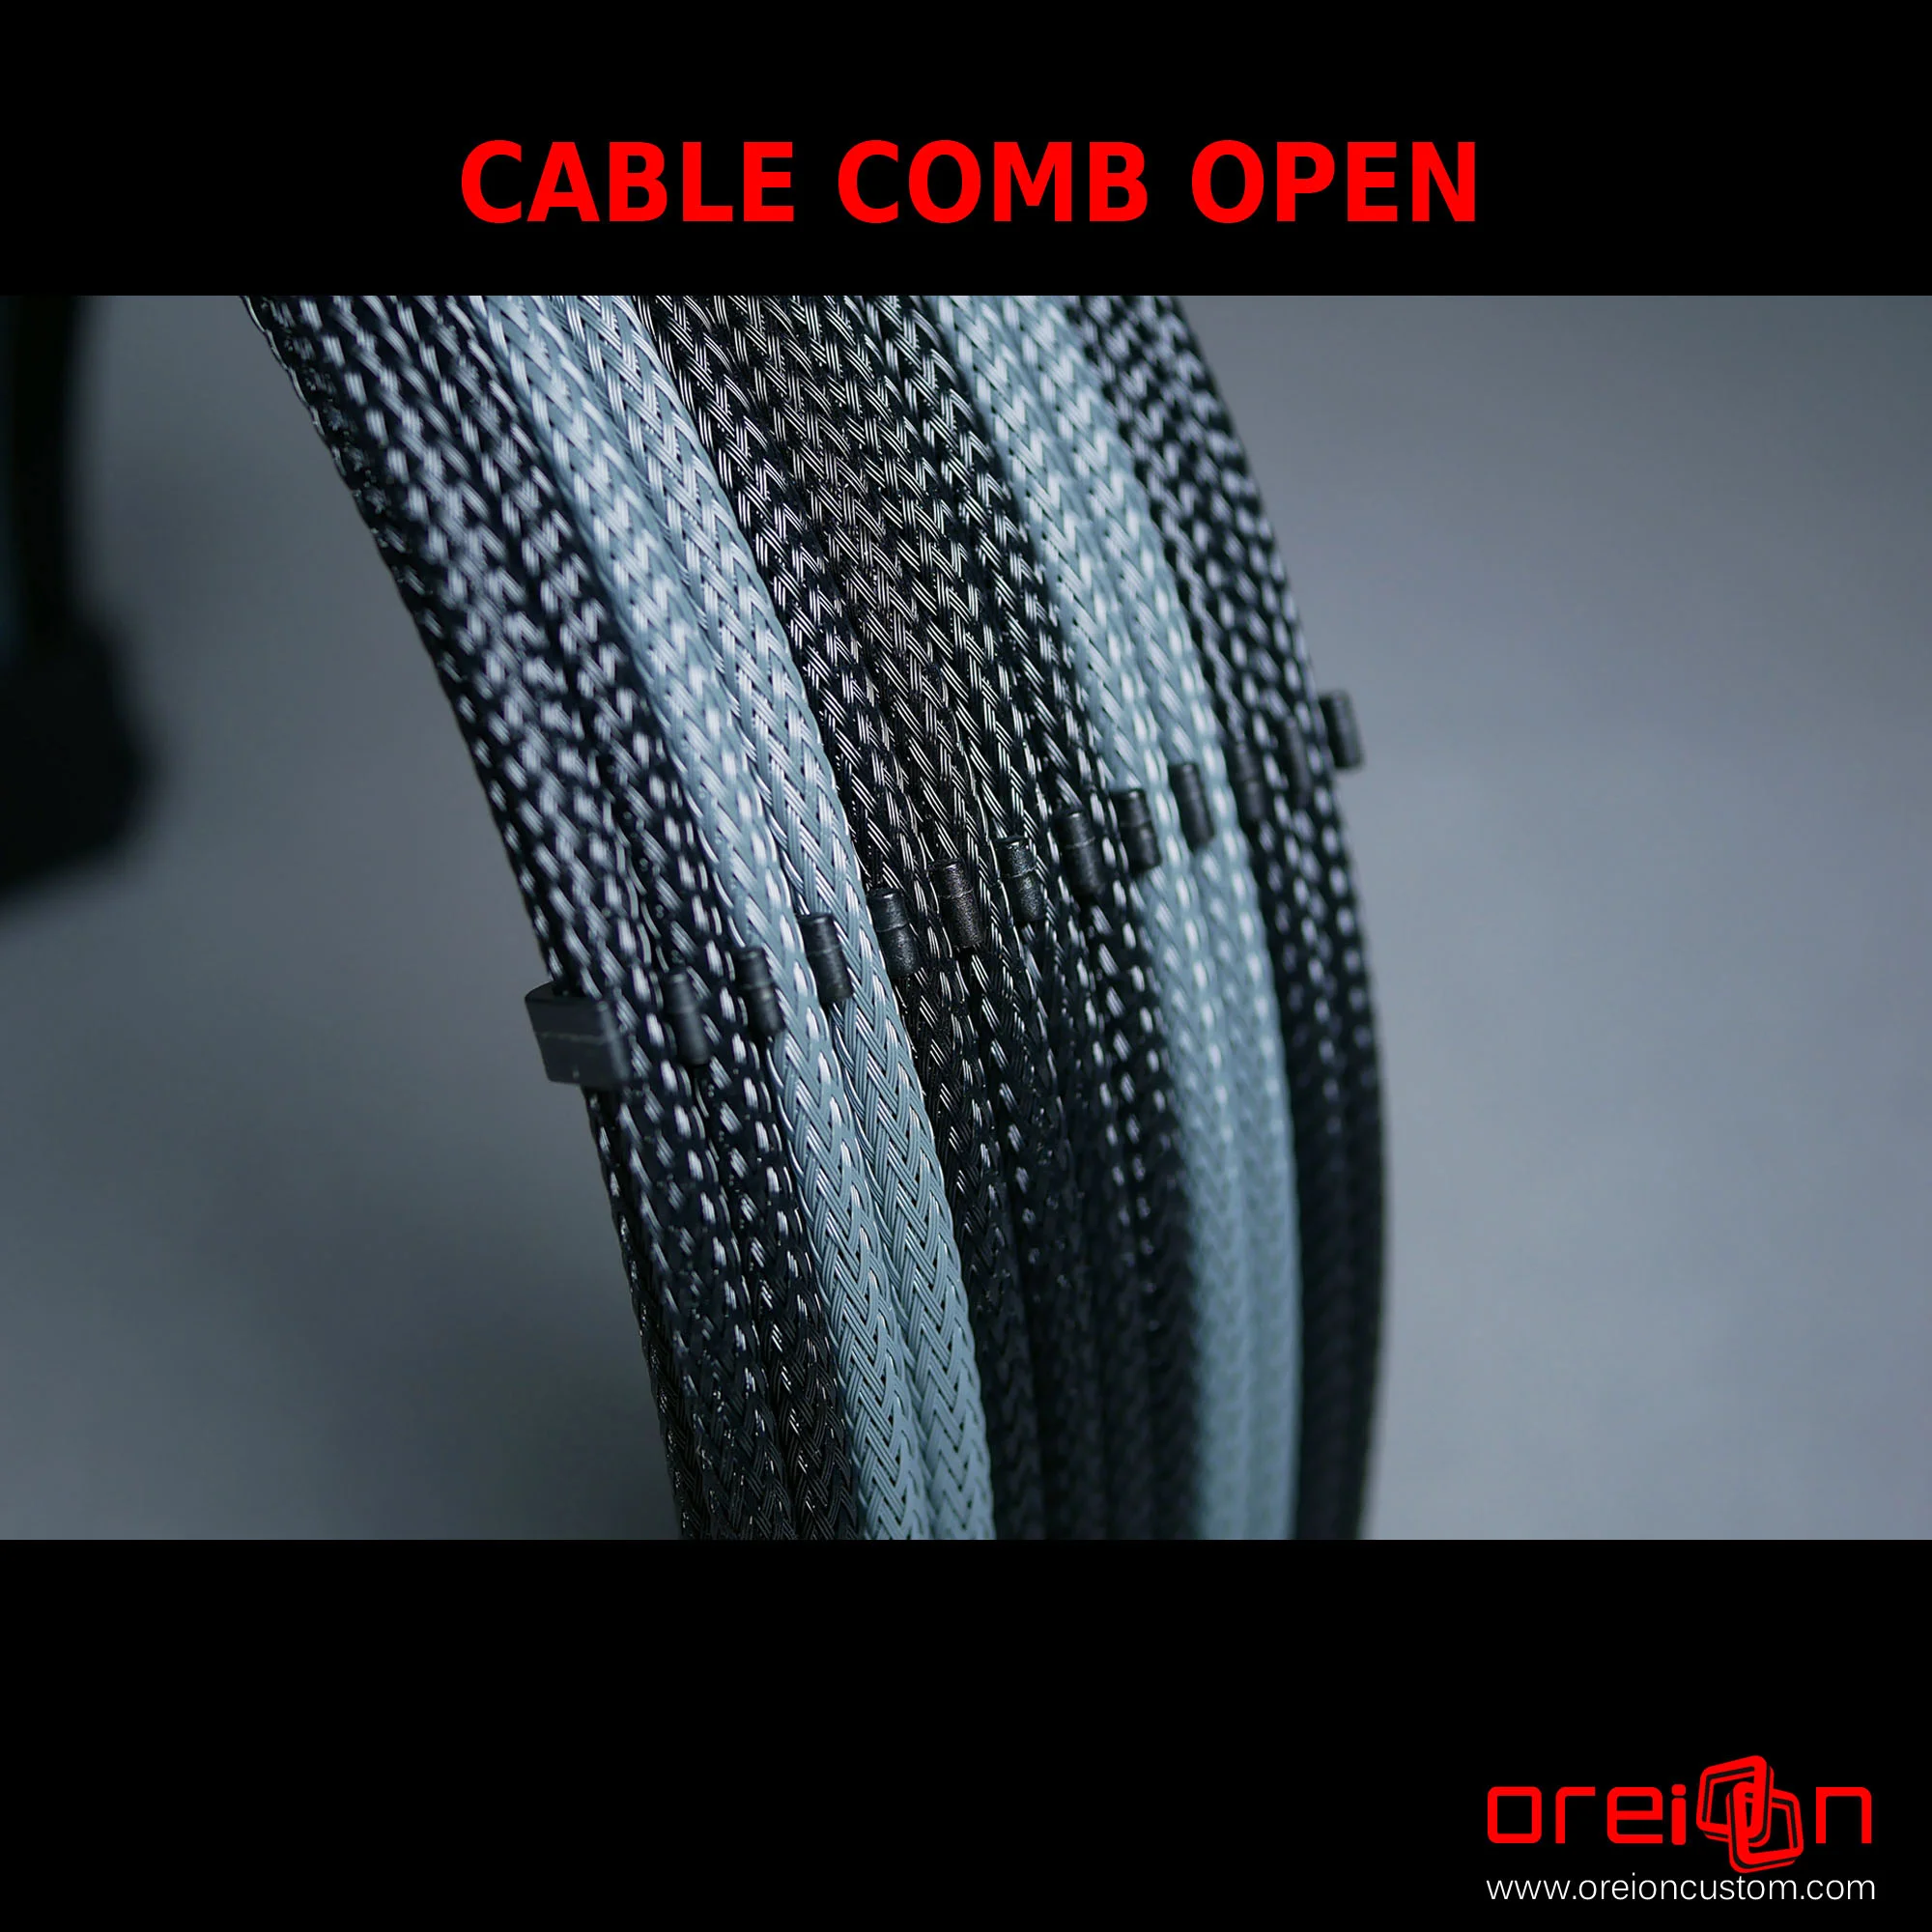 CABLE COMB open